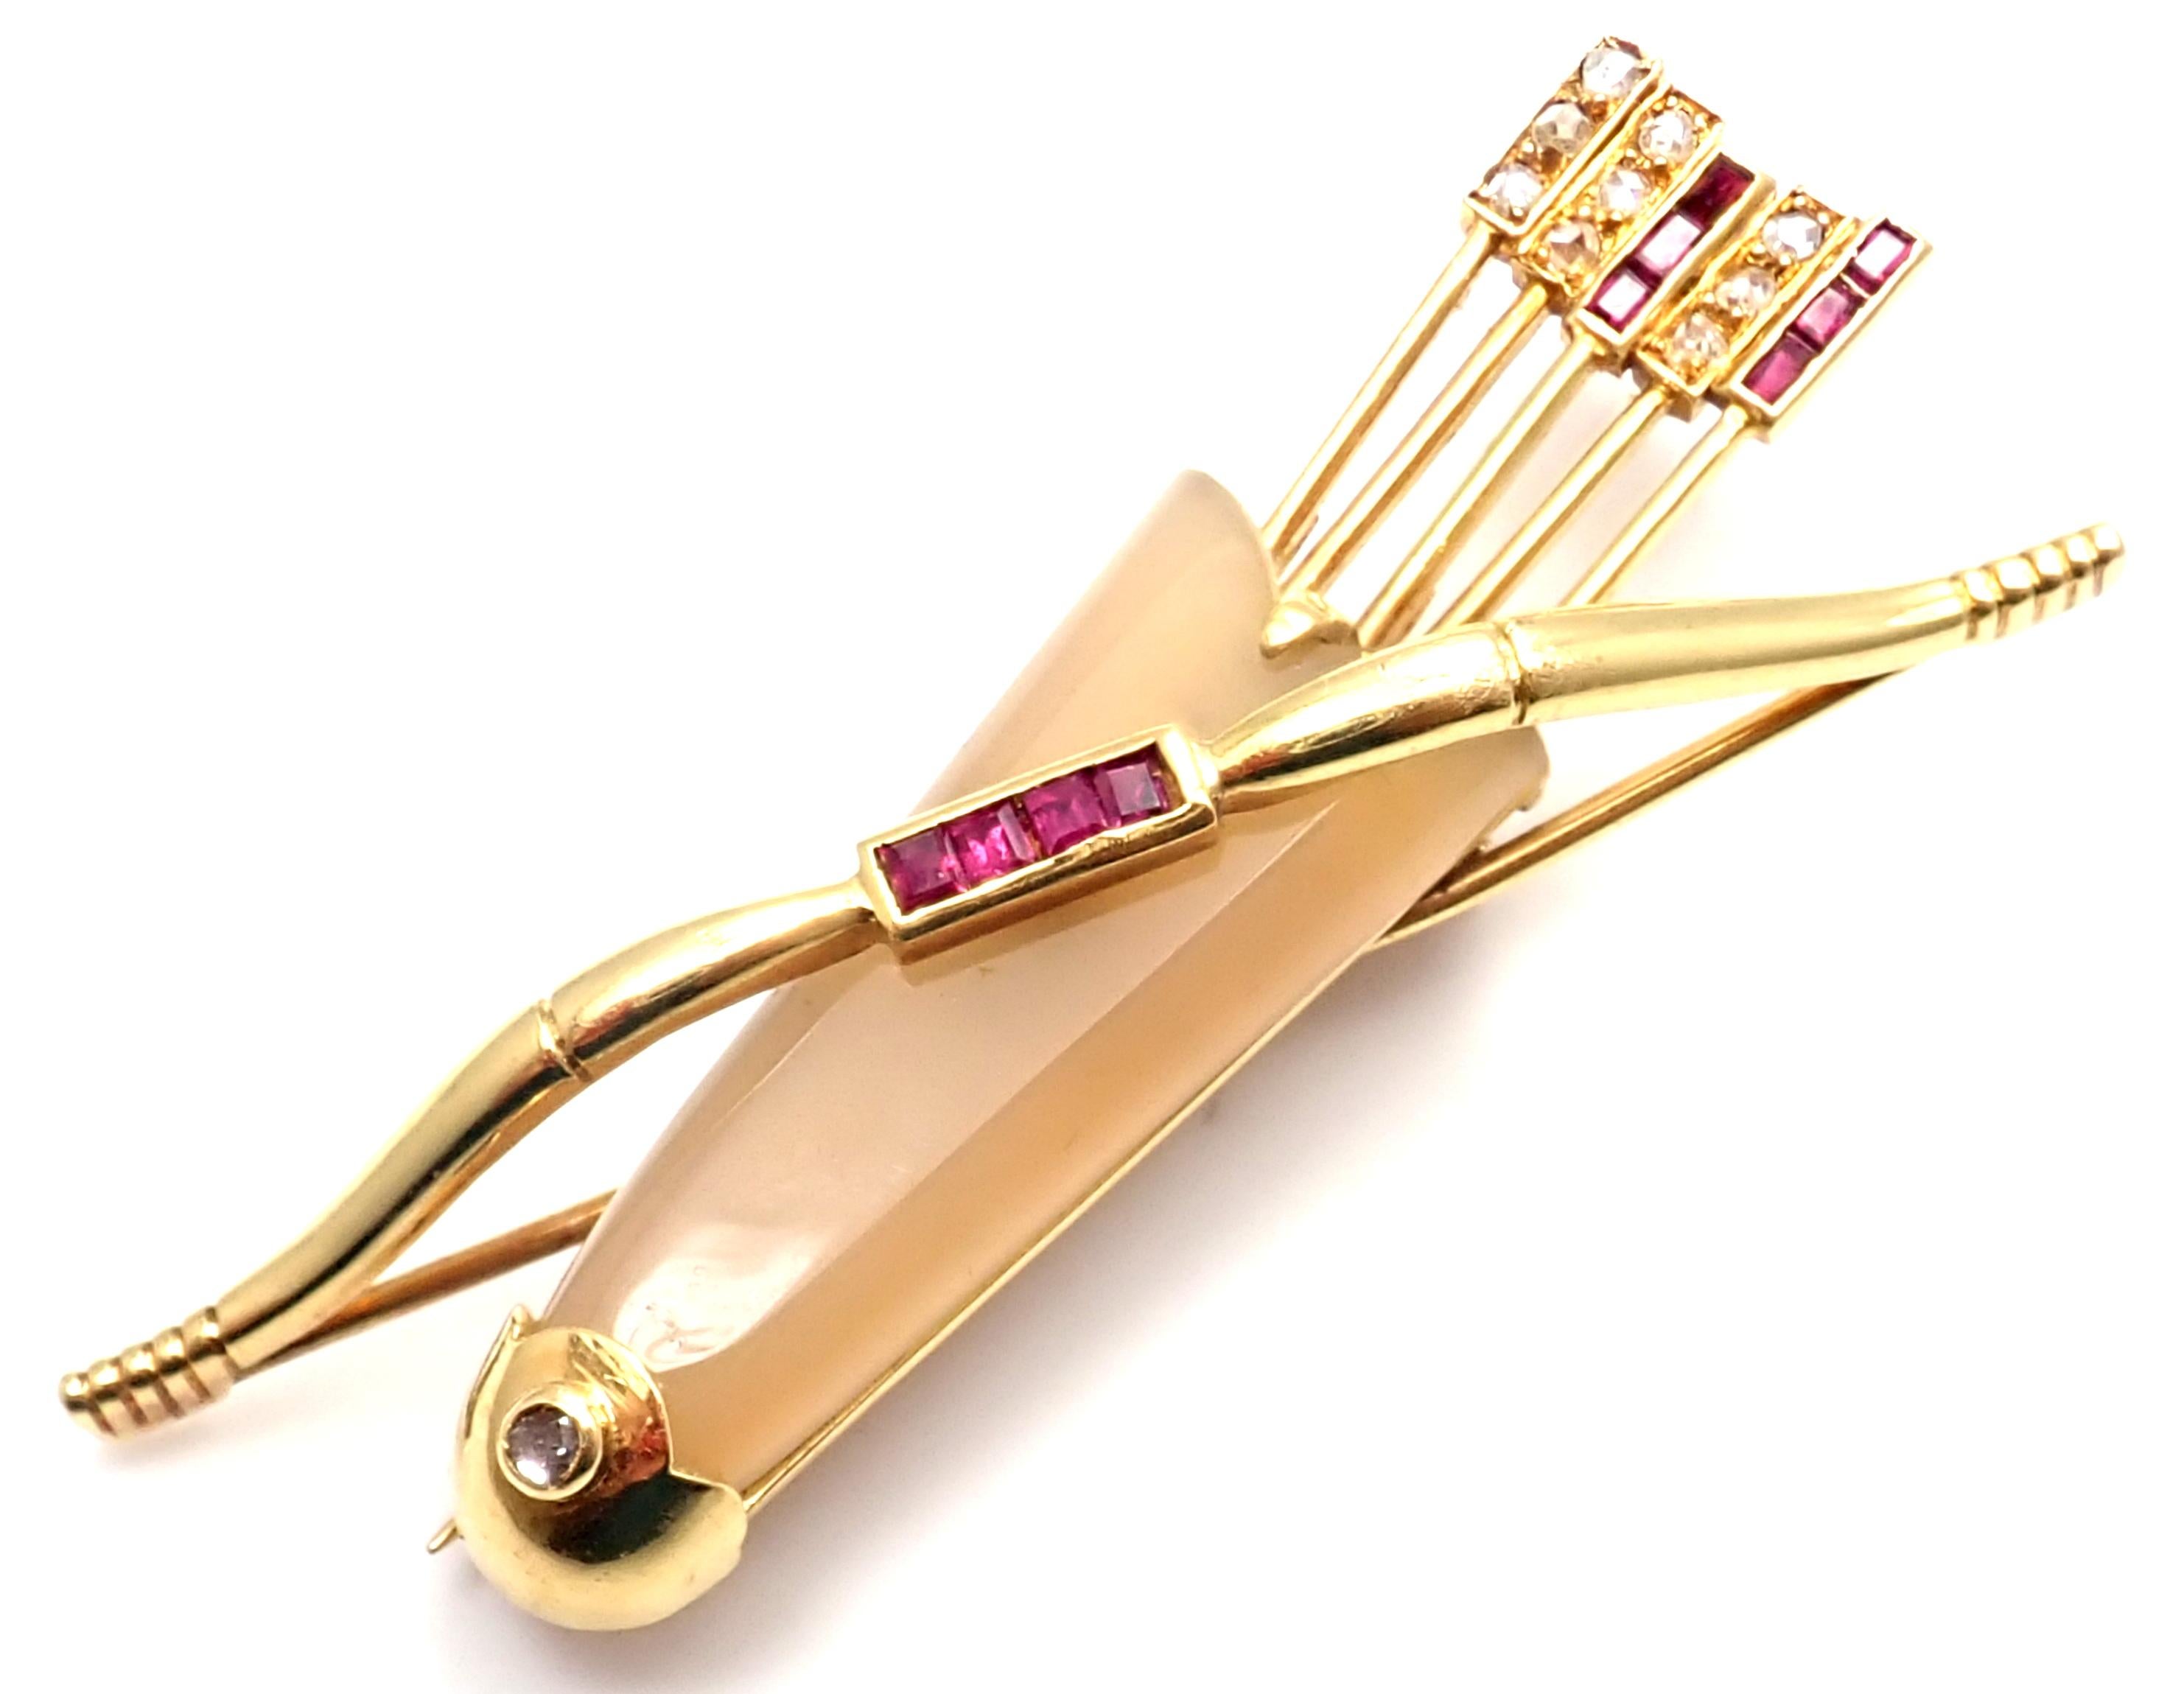 18k Yellow Gold Diamond Ruby Chalcedony Bow And Arrows Pin Brooche by Cartier.
Chalcedony stone 25mm x 12mm
10 rose cut diamonds and 10 rubies
Details:
Measurements: 48mm x 16mm
Weight: 9 grams
Stamped Hallmarks: Cartier France 18k 12426 French